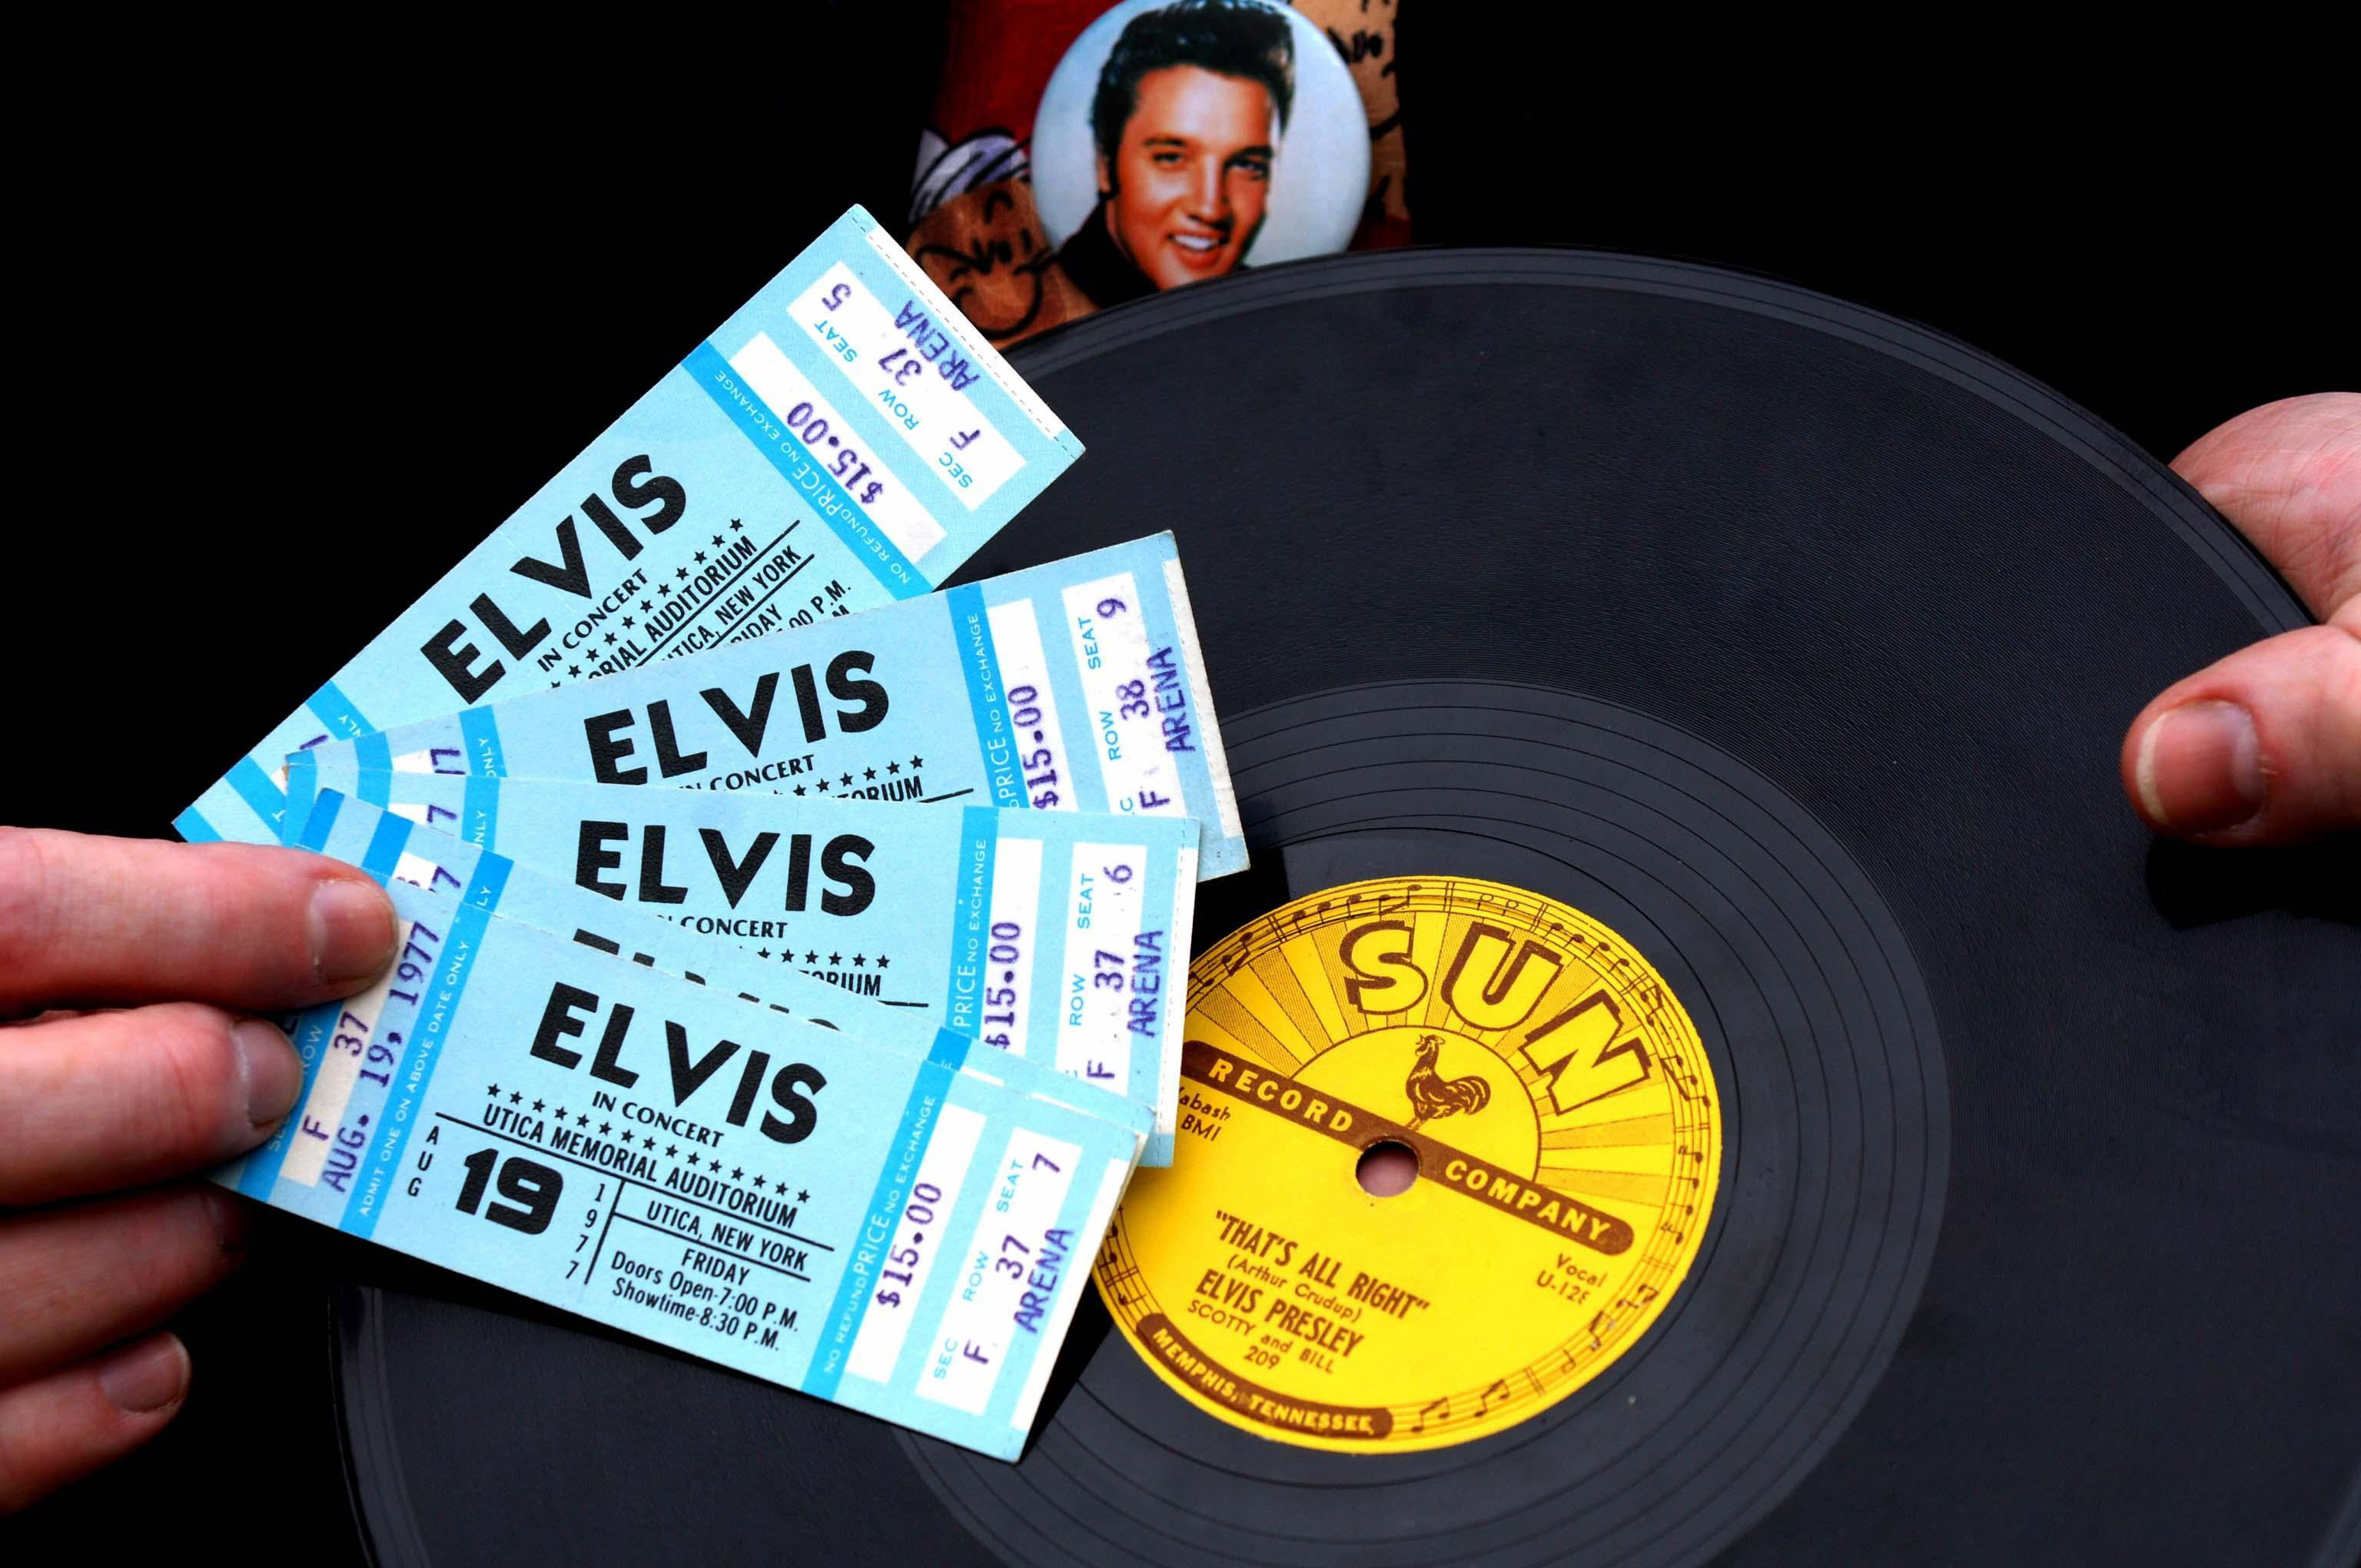 Tickets for an Elvis Presley concert in front of a vinyl record